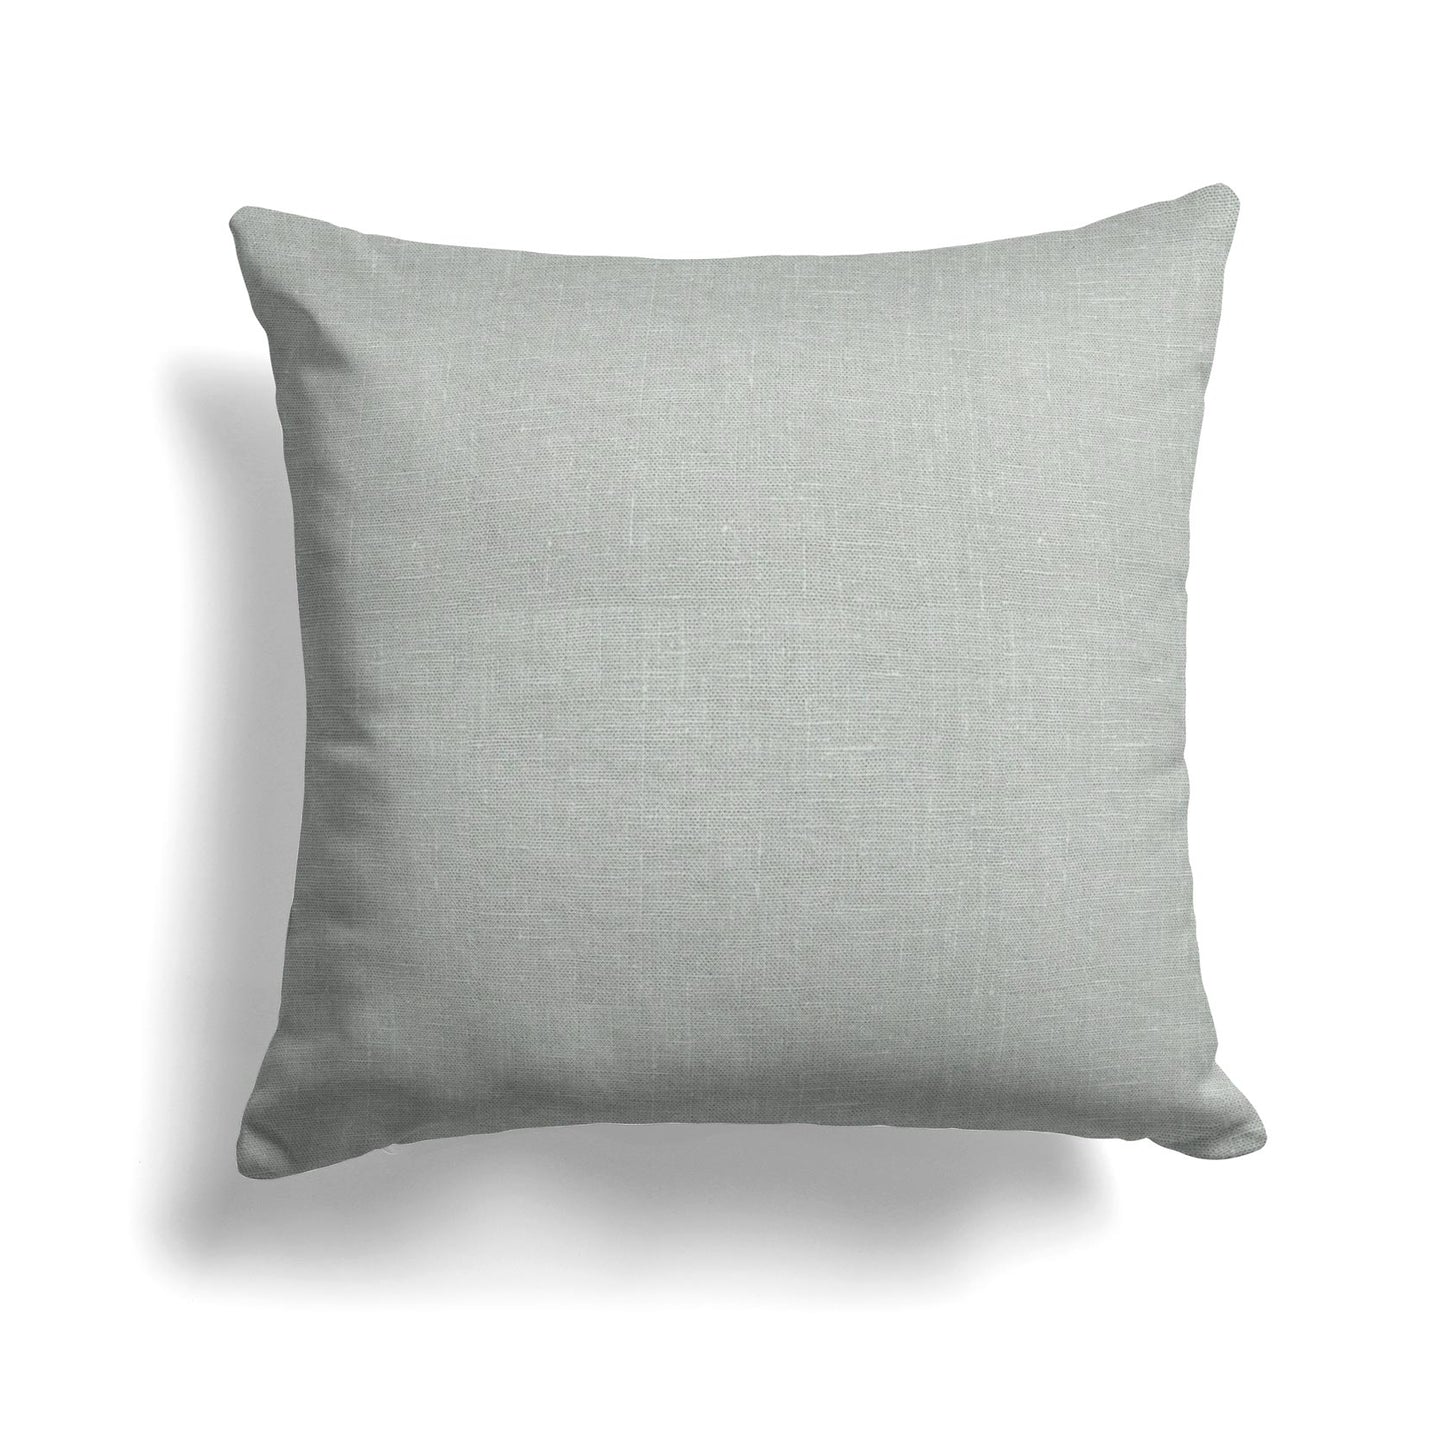 Stone Washed Linen Pillow Cover in Green